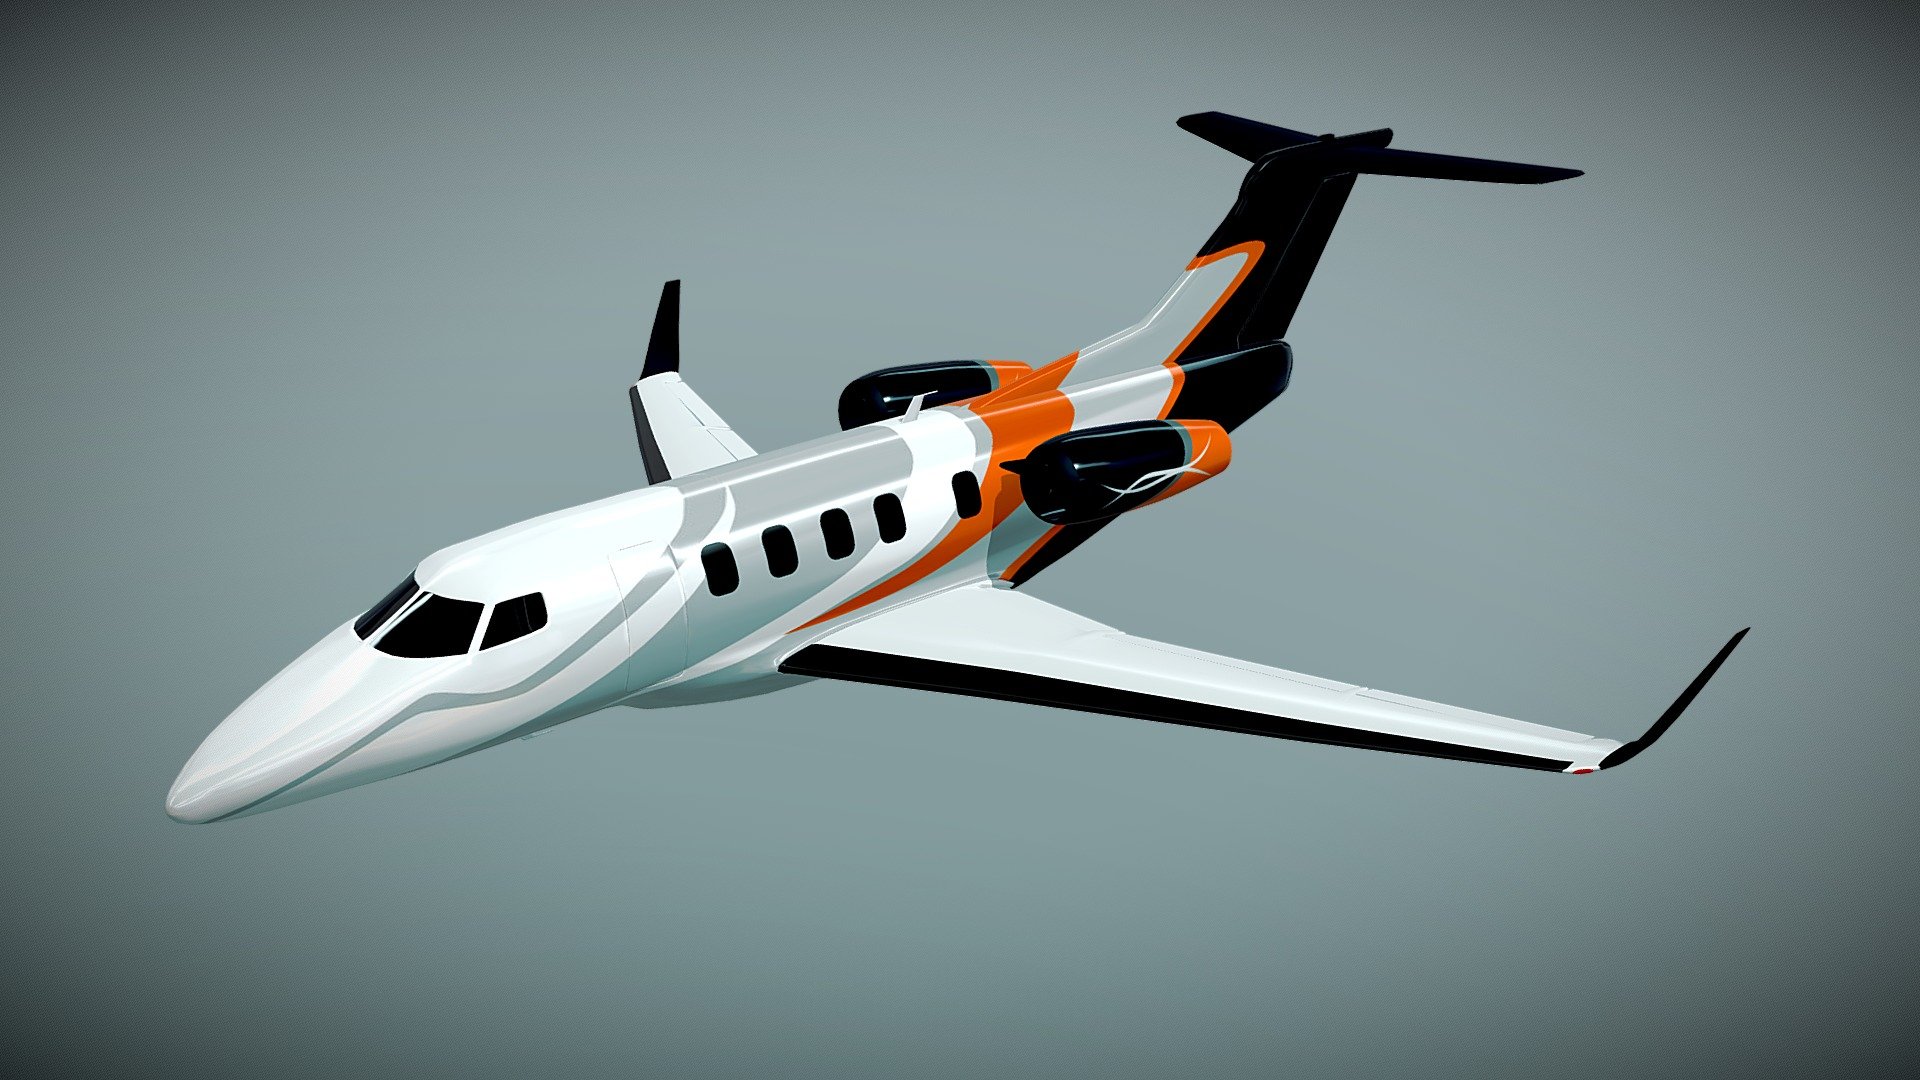 3d model of Embraer Phenom 300 business jet.Model was created with blender3d 2.71 version.Images were created with blender internal render,settings included with blender file.There are 2 textures one for fuselage 2050x2050px png file with stripes and with windows.Second texture is for engine 1024x1024px png file.Textures were created with inkscape vector editor similar to real scale model with some variations in shape.There are no interior objects and no landing gears for this product.Elevators are detached,but not rigged.Enjoy my product.

3ds file verts: 76900 polys: 26300

obj file verts: 14224 polys: 26300

Checked with GLC player - Embraer Phenom 300 private jet - Buy Royalty Free 3D model by koleos3d 3d model